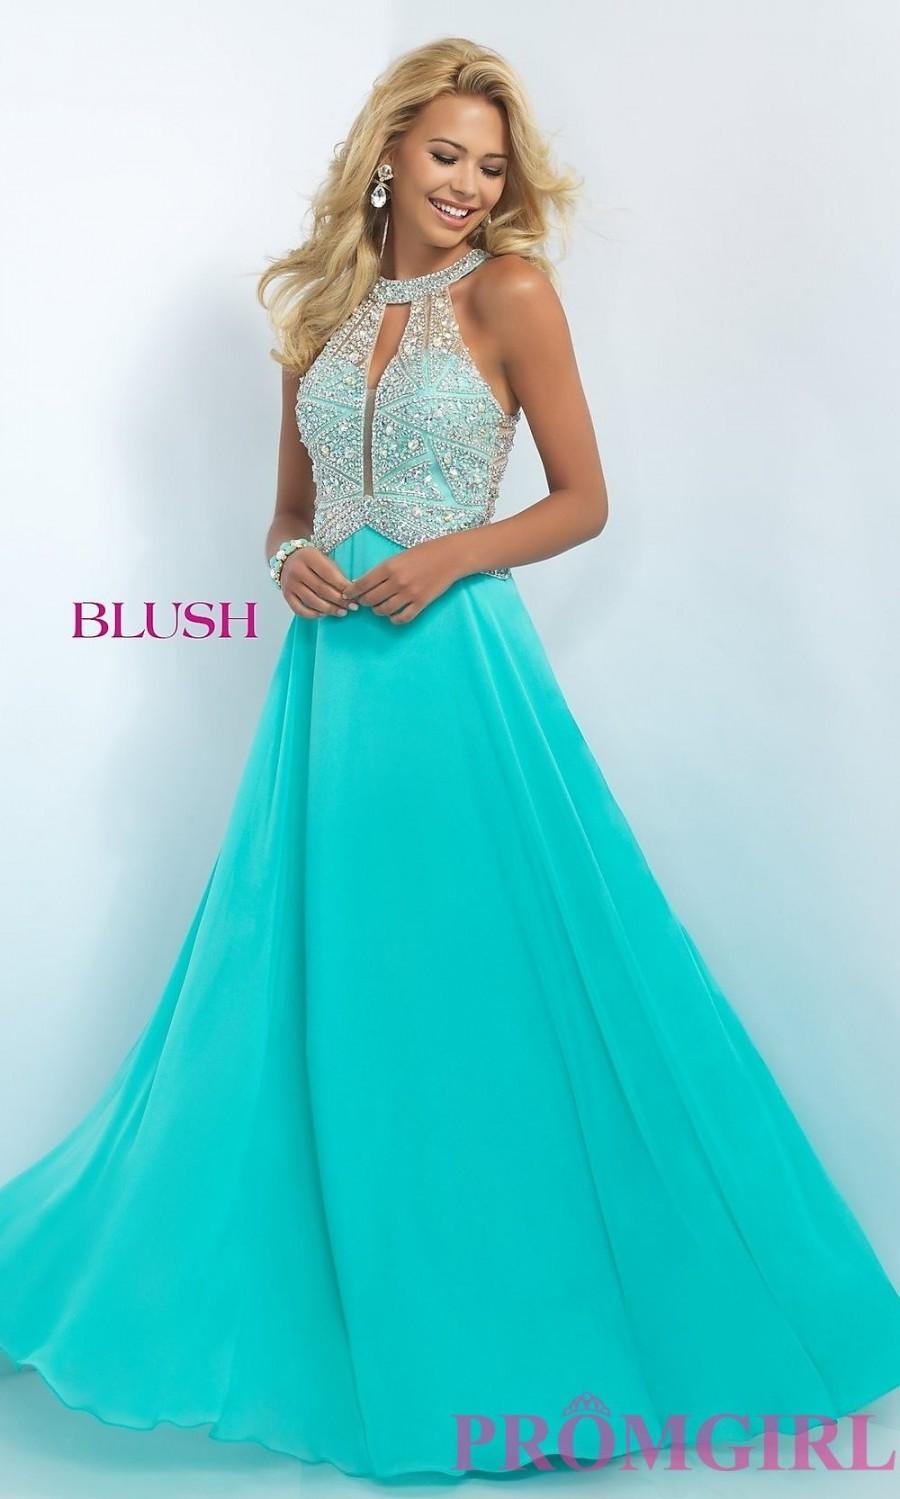 Mariage - Embellished Illusion Bodice Floor Length Chiffon Dress by Blush - Discount Evening Dresses 